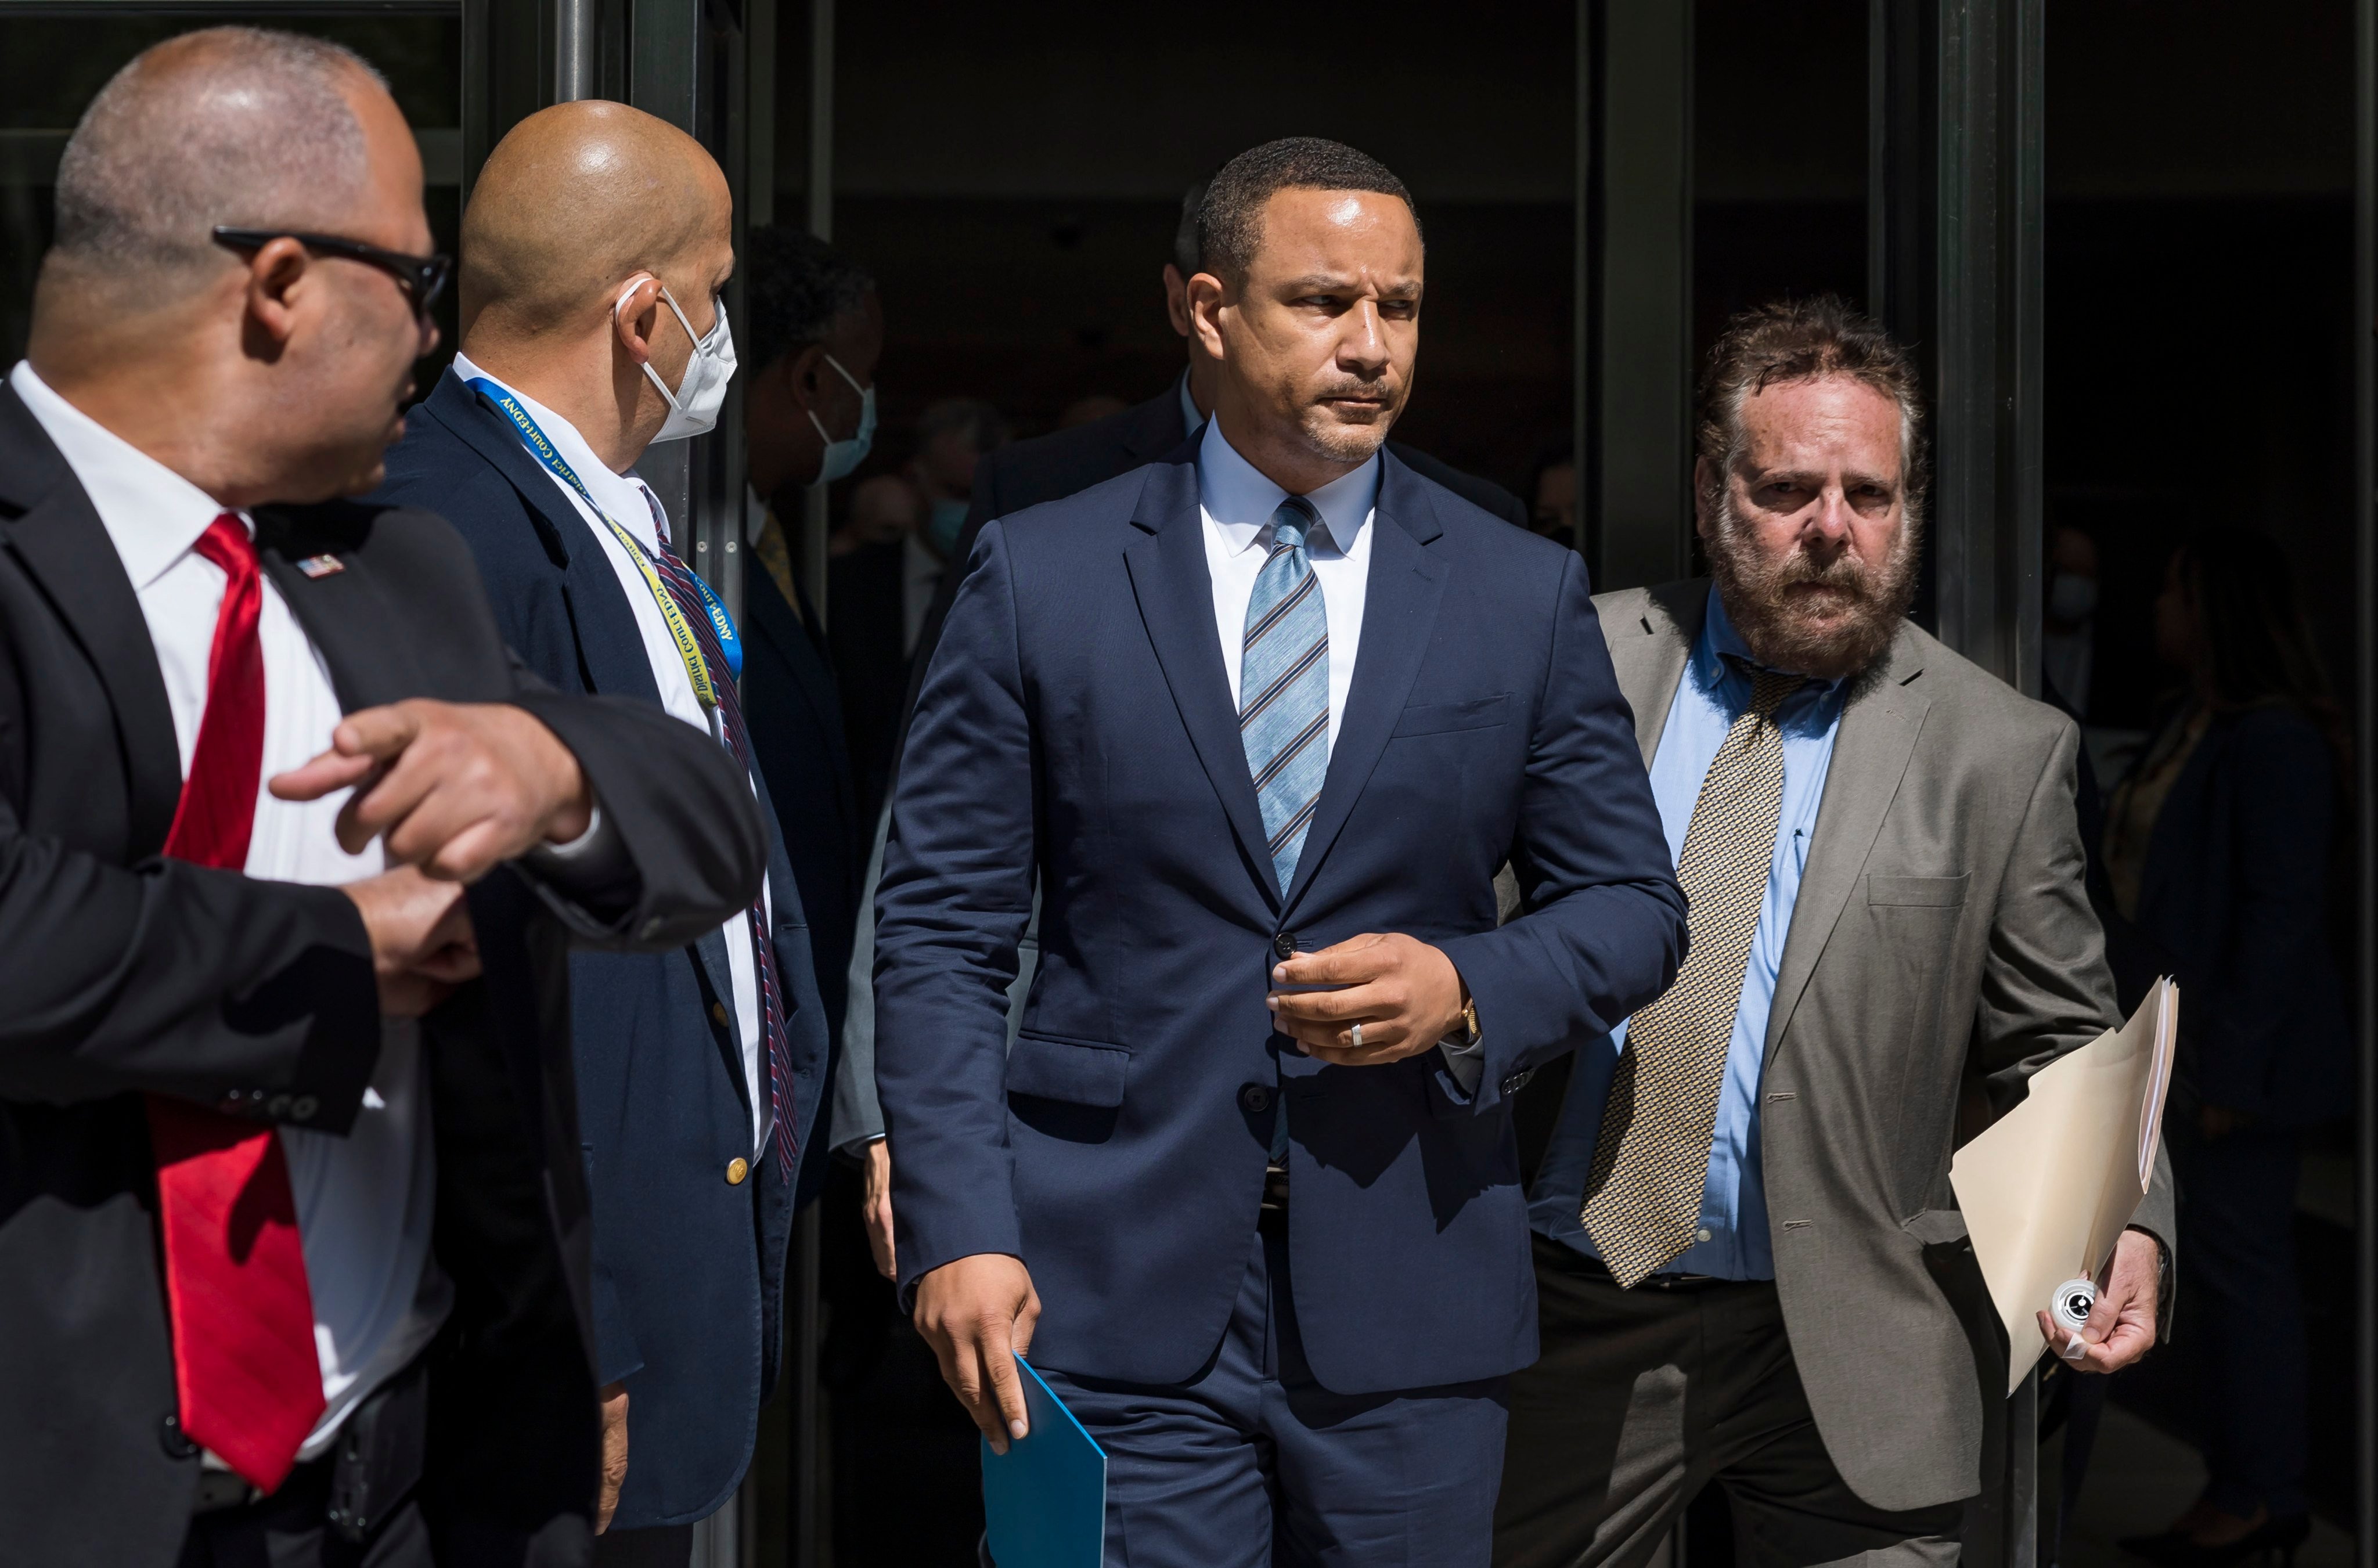 Breon Peace (centre), US attorney for the Eastern District of New York, prosecuted the case. Photo: EPA-EFE